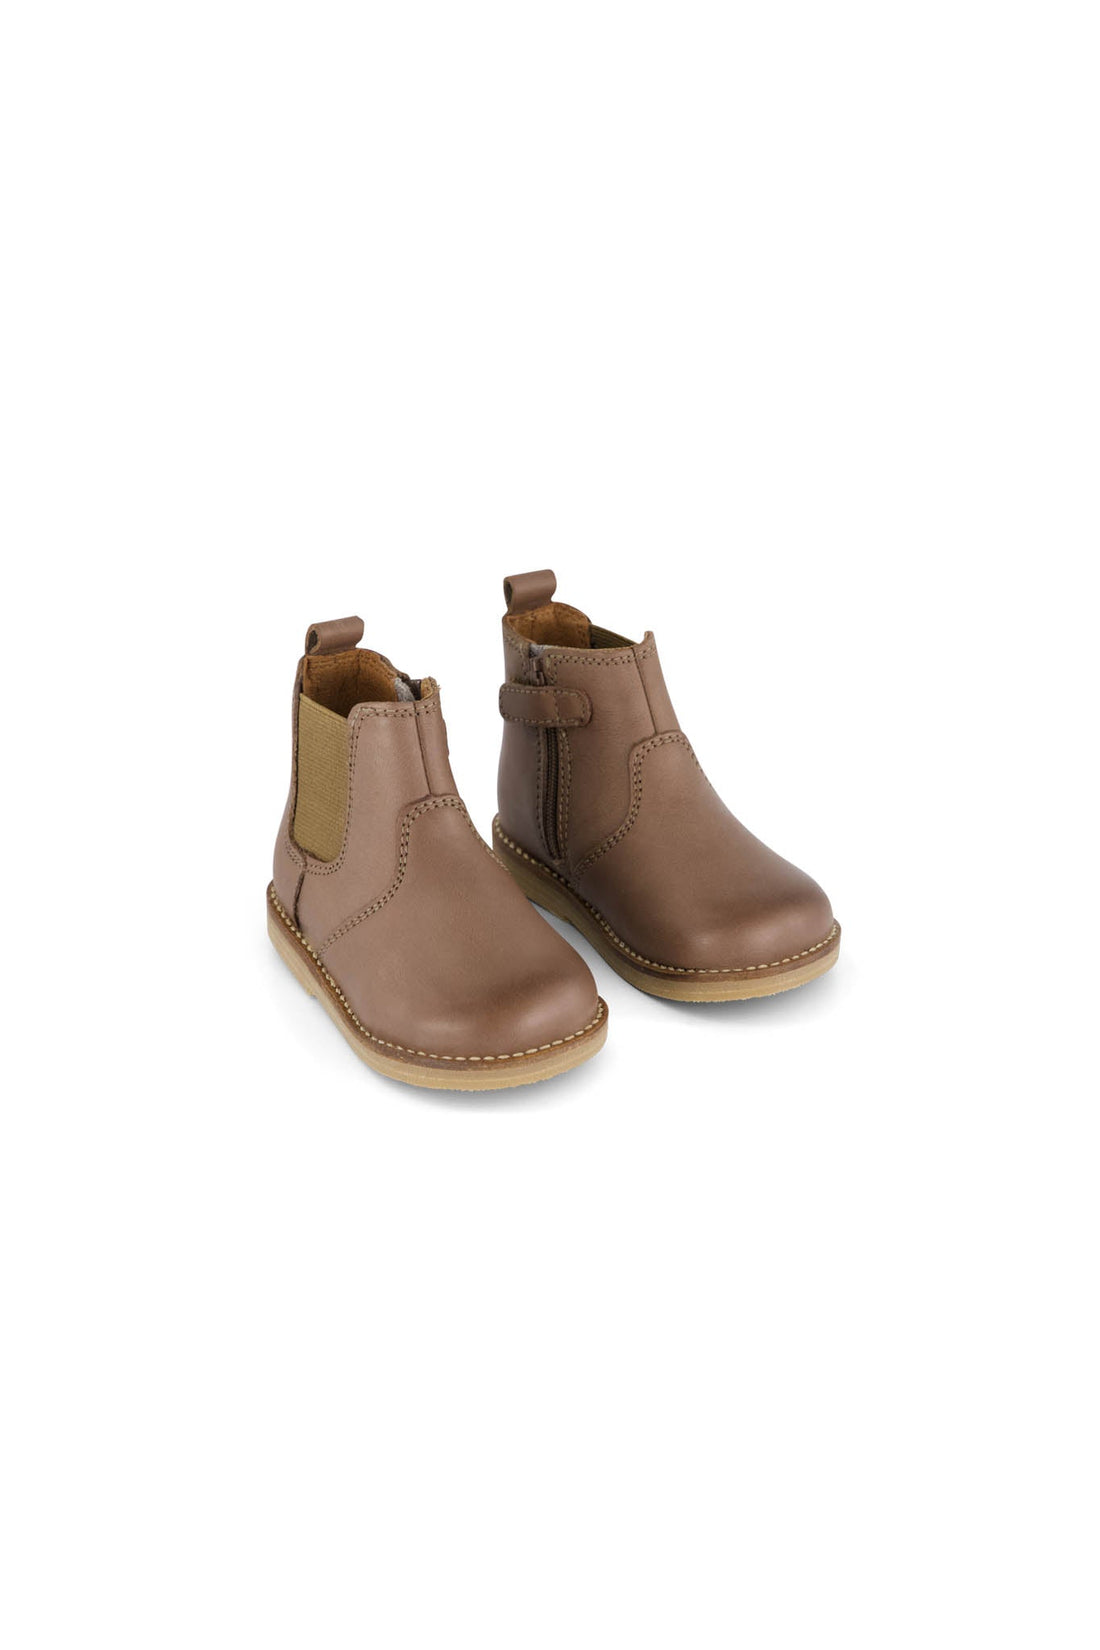 Leather Boot with Elastic Side - Bear Childrens Footwear from Jamie Kay USA